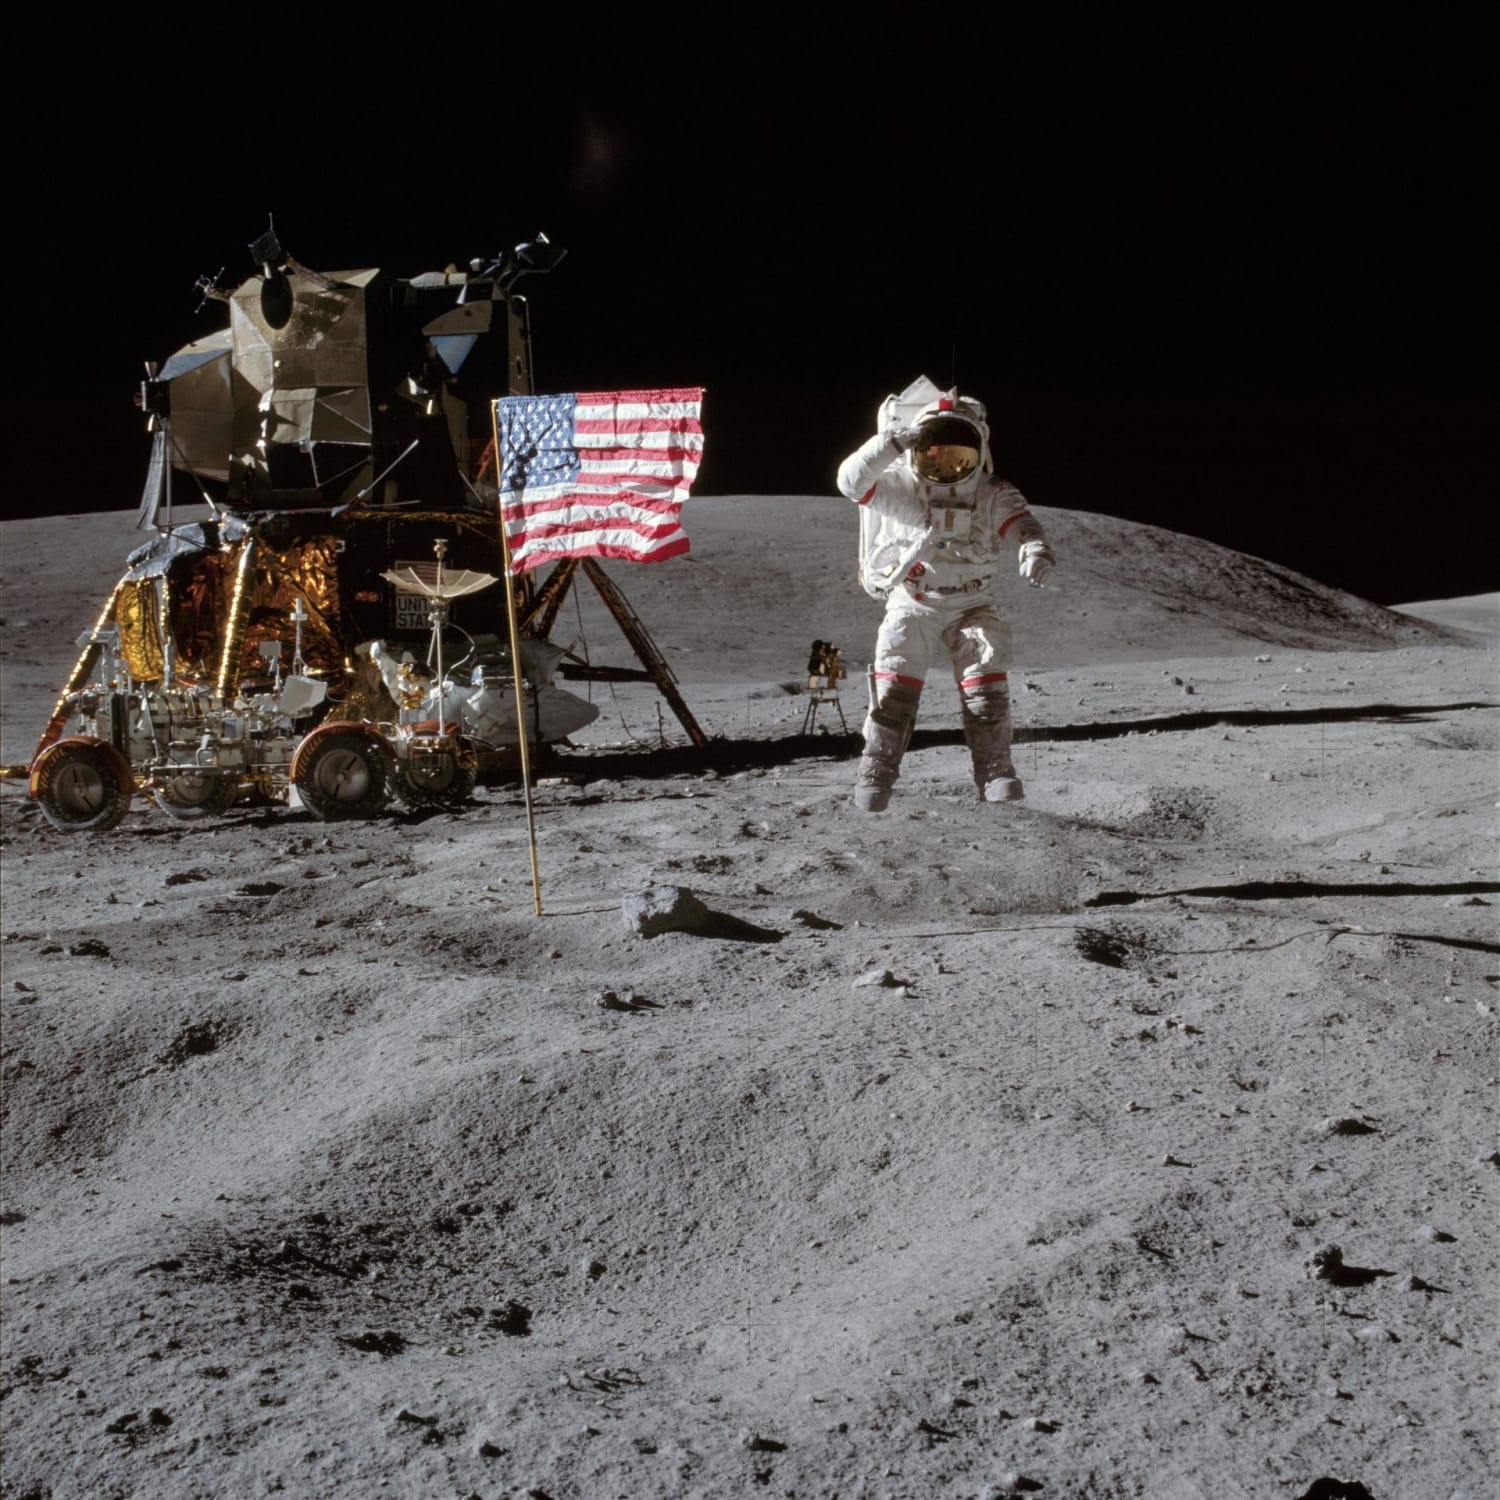 Astronaut John W. Young, commander of the Apollo 16 lunar landing mission, leaps from the lunar surface as he salutes the United States flag at the Descartes landing site during the first Apollo 16 extravehicular activity (EVA).